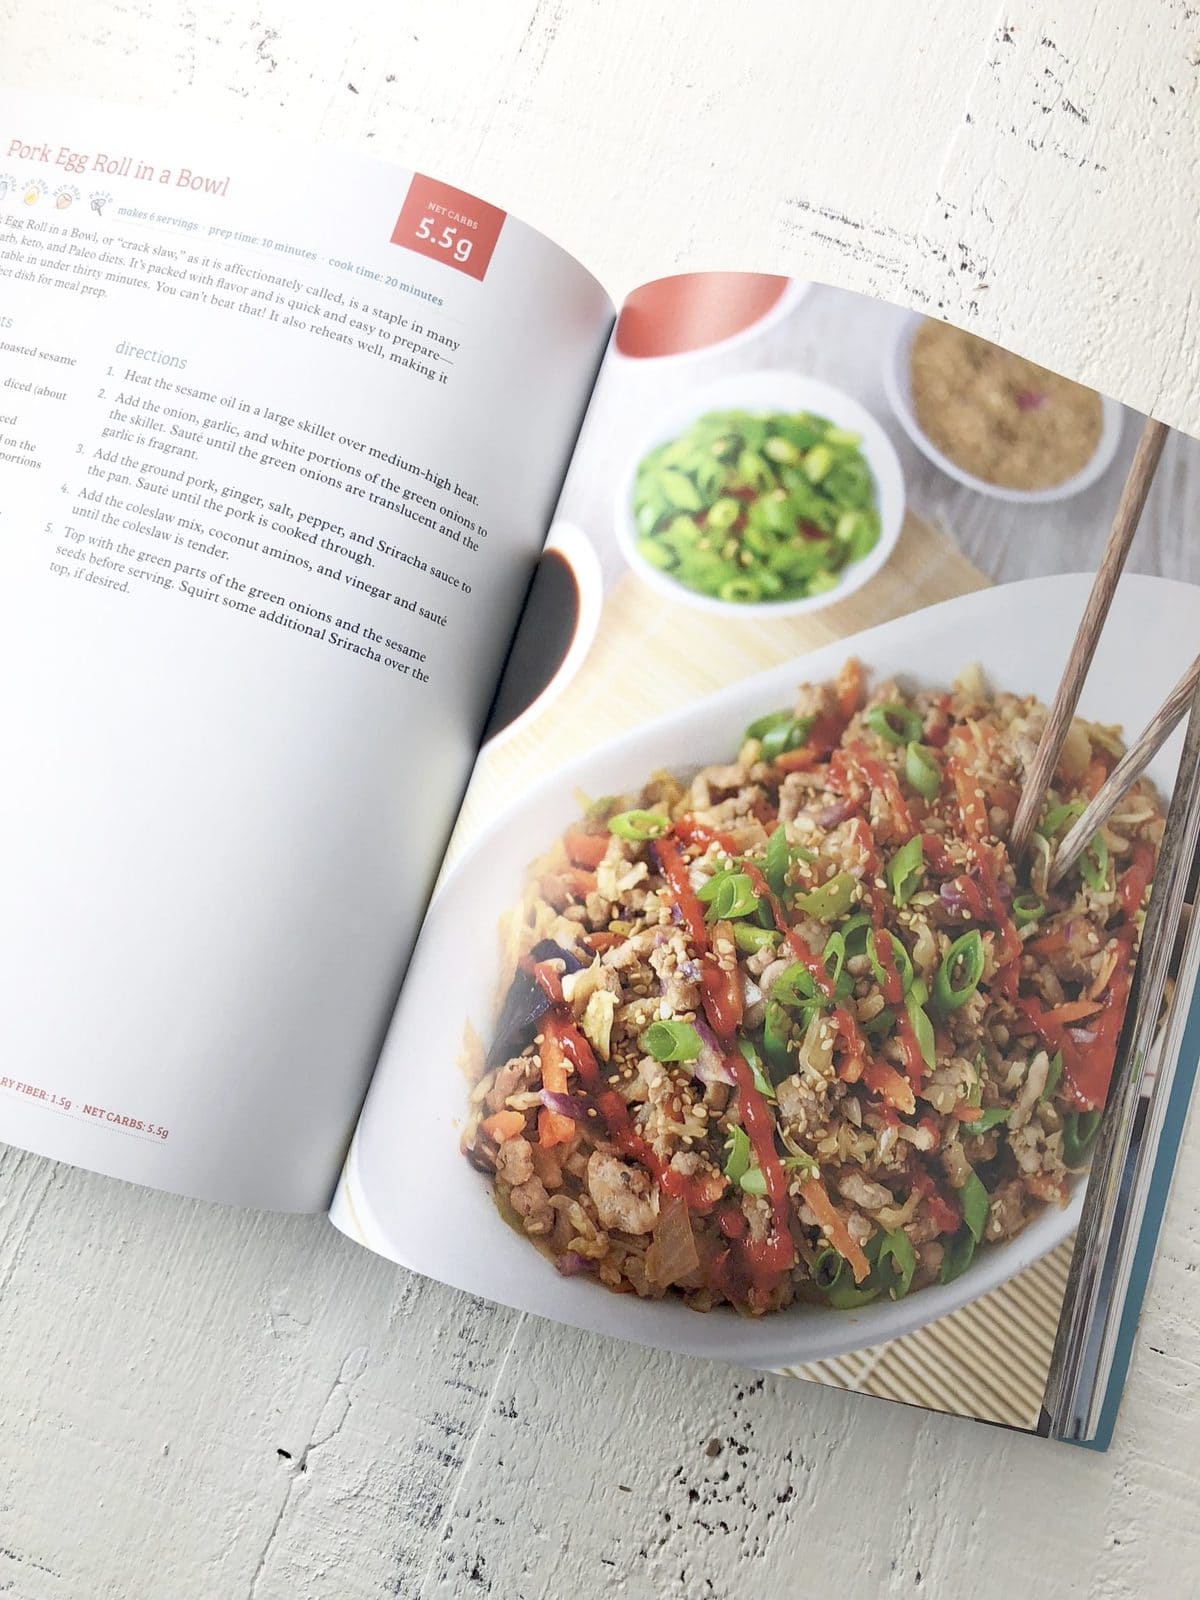 Craveable Keto Cookbook By Kyndra D. Holley